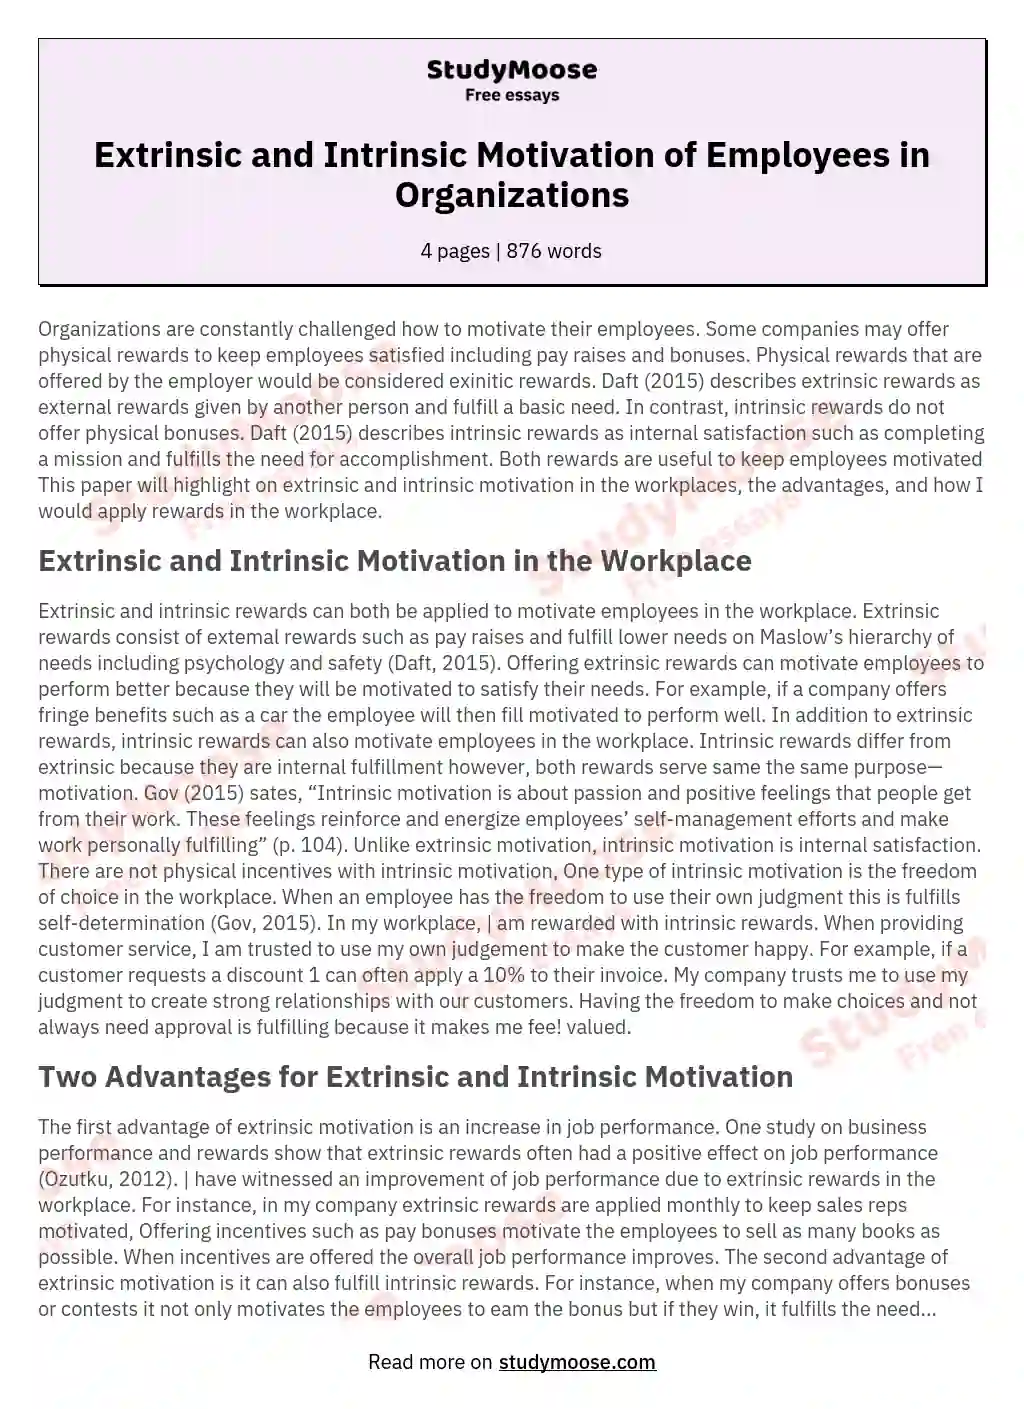 Extrinsic and Intrinsic Motivation of Employees in Organizations essay